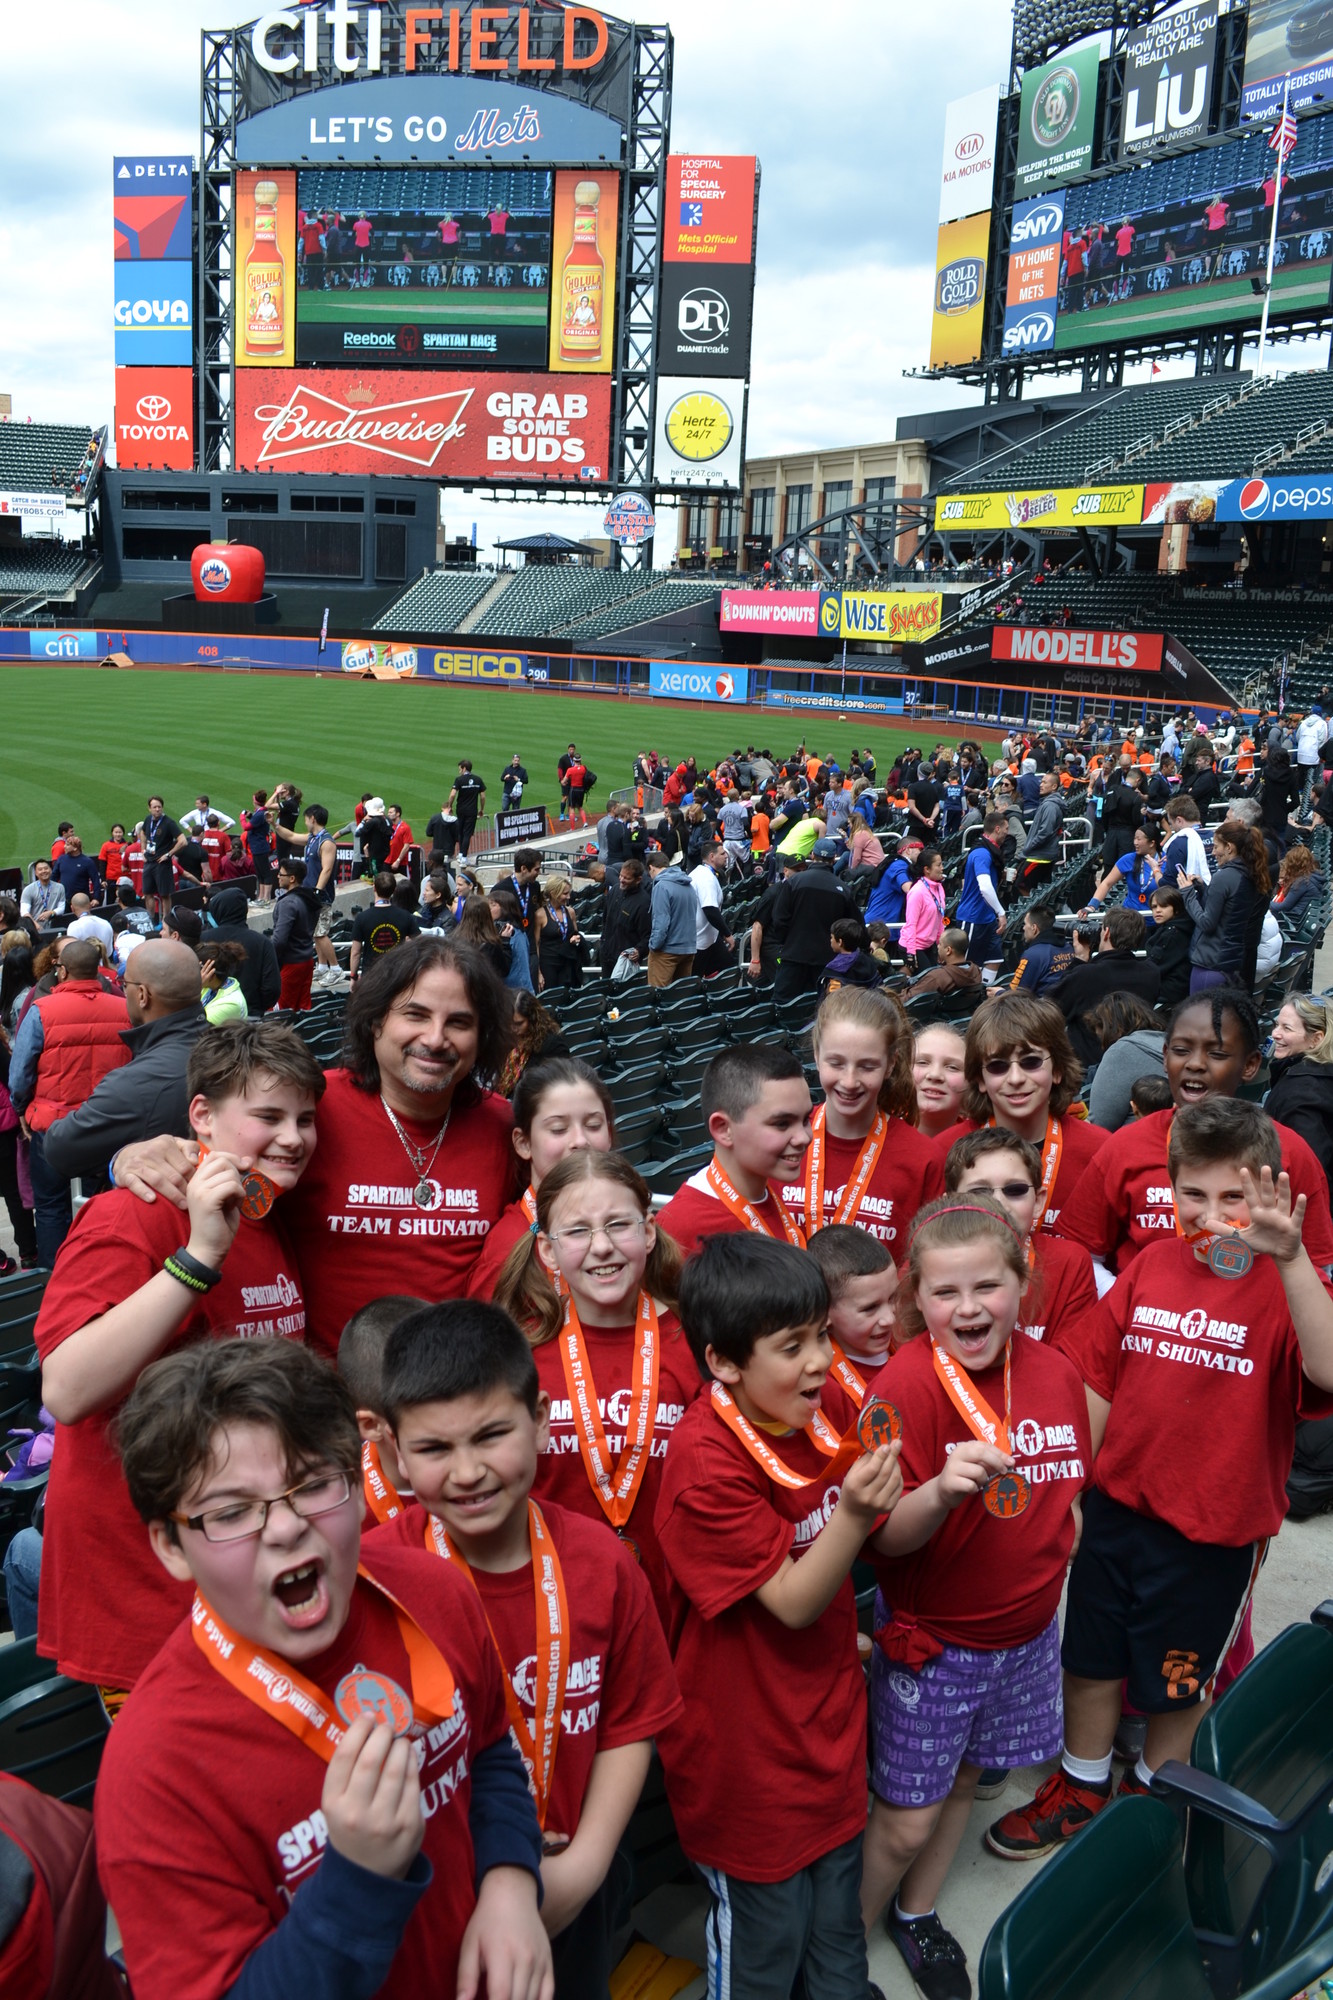 A group of 16 Baldwin karate students used their legs for more than kicking last week. The energetic youngsters ran a 1-mile obstacle course that snaked through CitiField, home of the Mets, and included the playing surface and other areas normally off-limits to non-players.